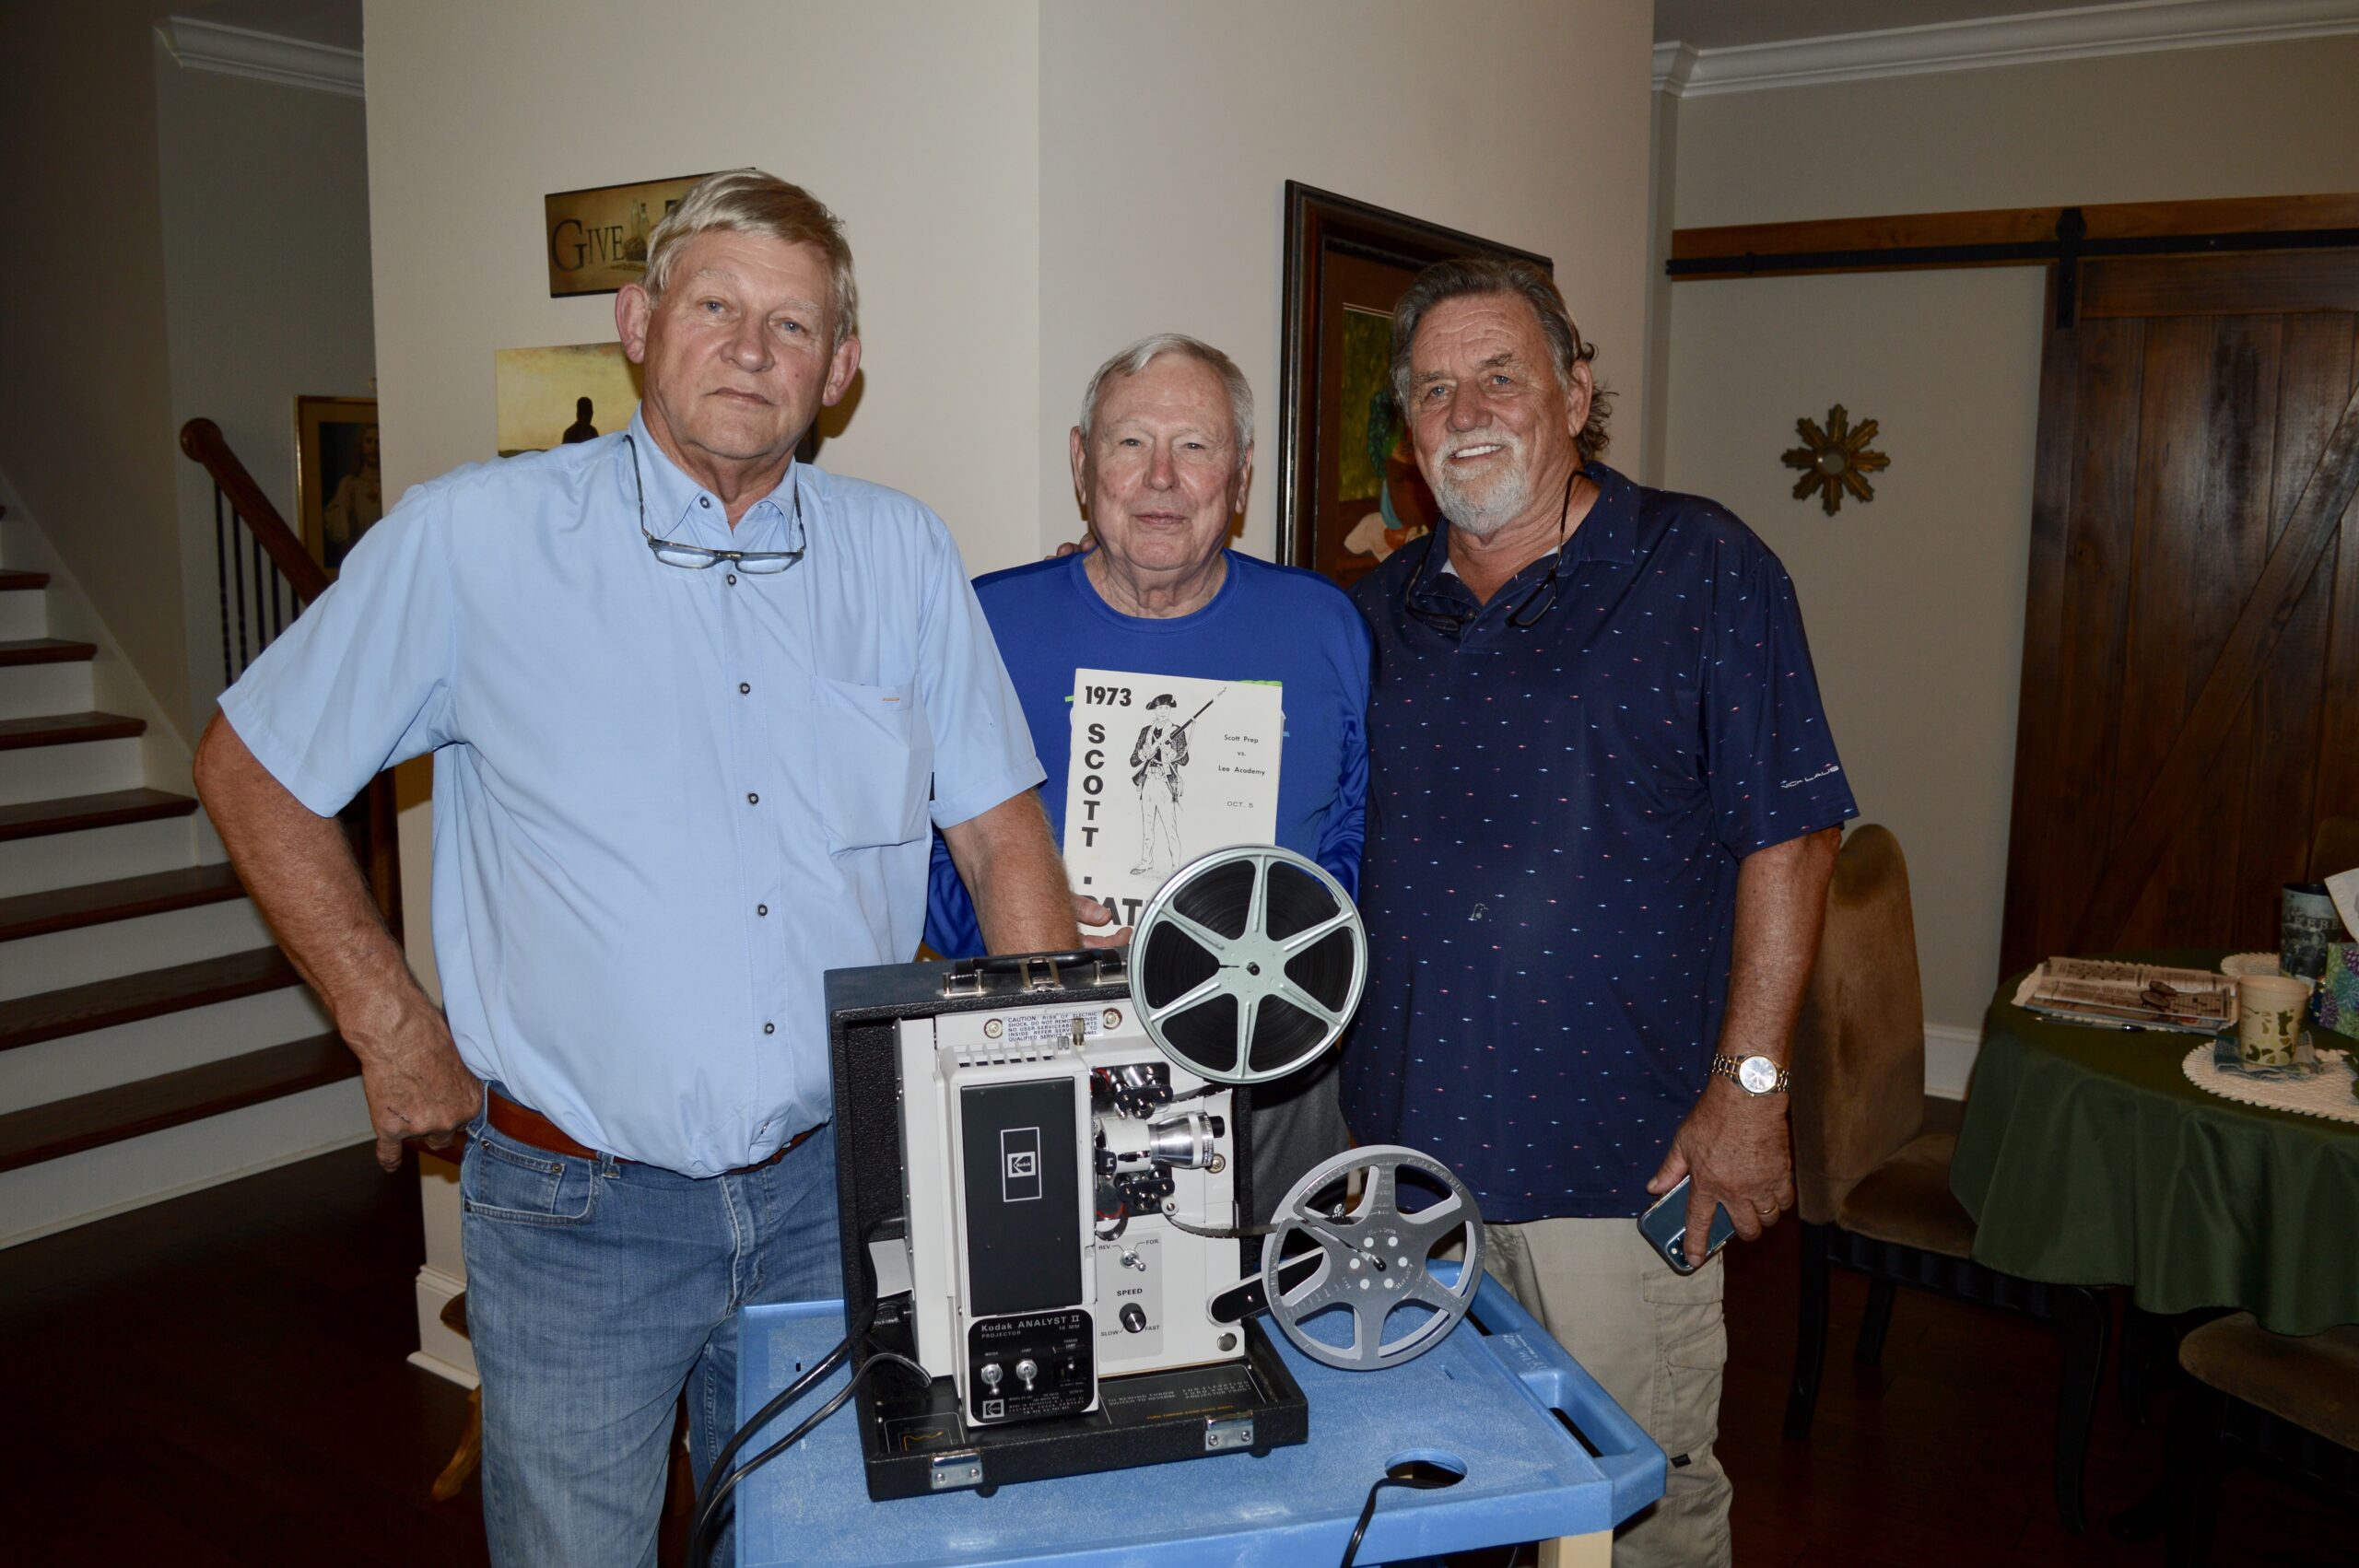 Gathering for the 50th anniversary game film viewing at Coach Chuck Barber‘s house. Pictured from left to right are Boykin Smith (Scott Prep #26), Chuck Barber (coach at Lee Academy in 1973) and Ricky Dorris (Lee Academy #40)